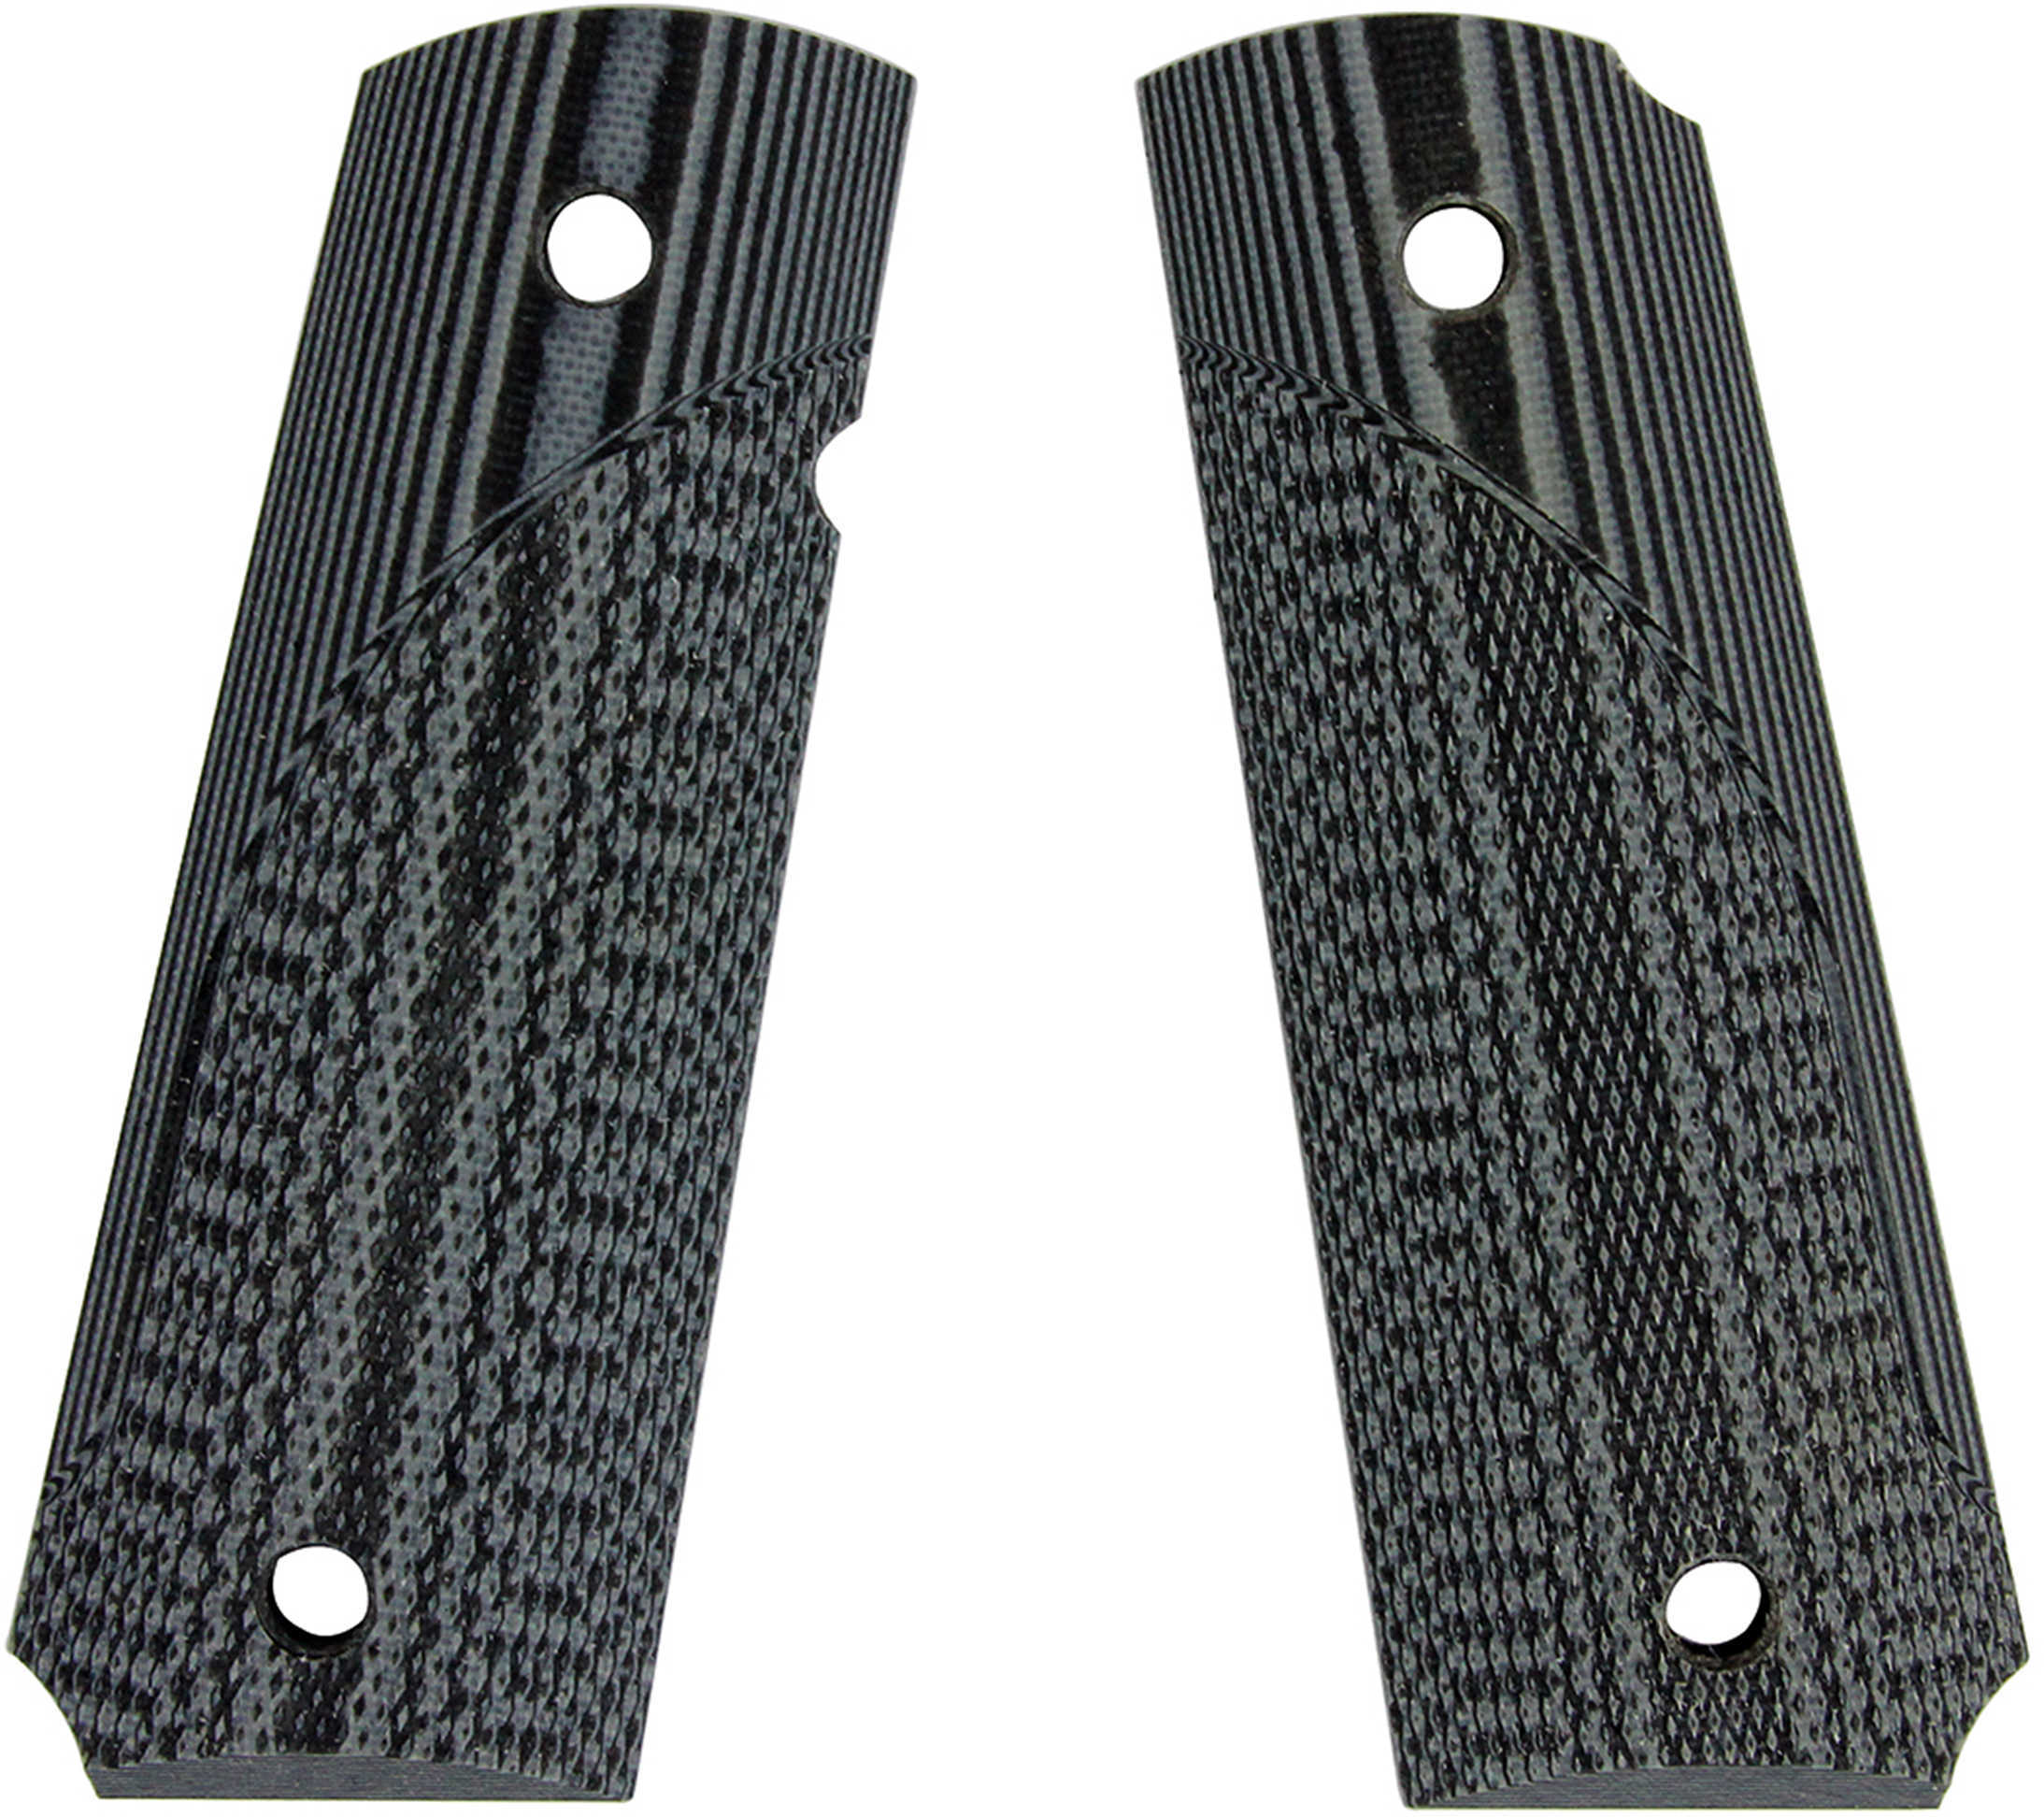 Pachmayr G10 Material Fits 1911 Gray/Black Checkered Finish 61001